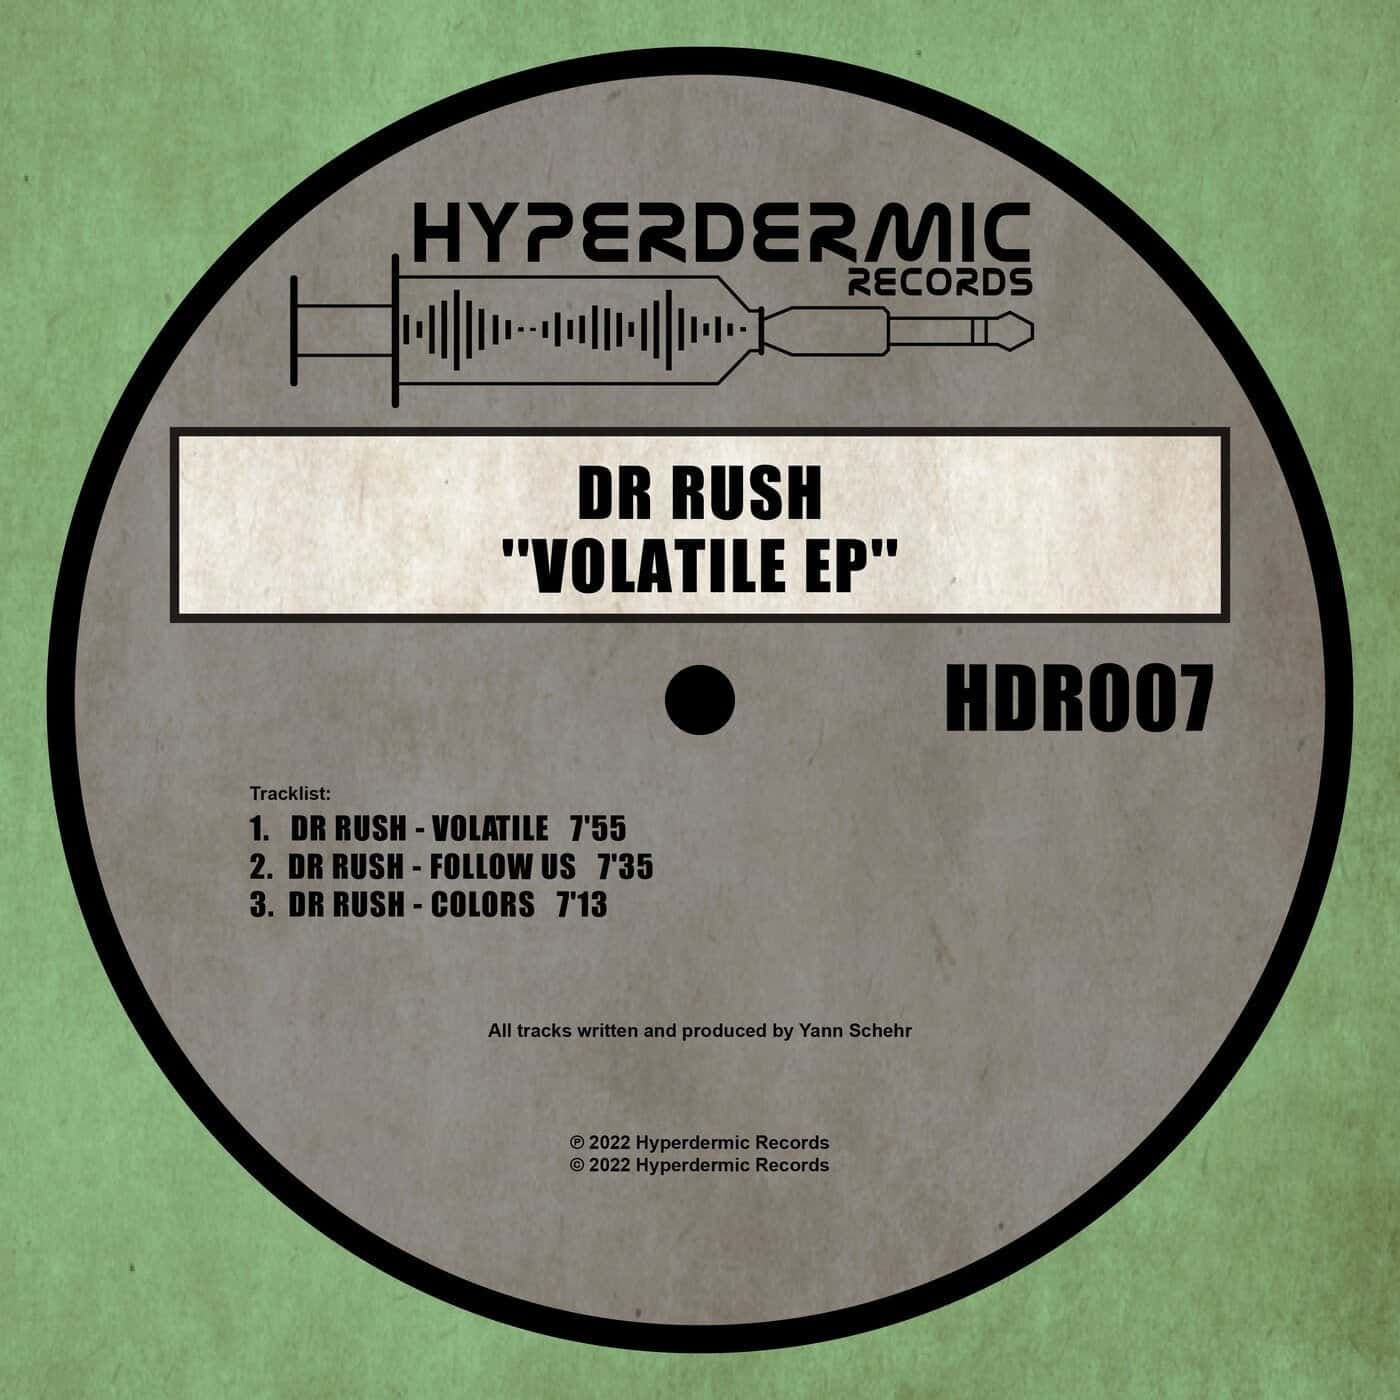 image cover: Dr Rush - Volatile EP / HDR007